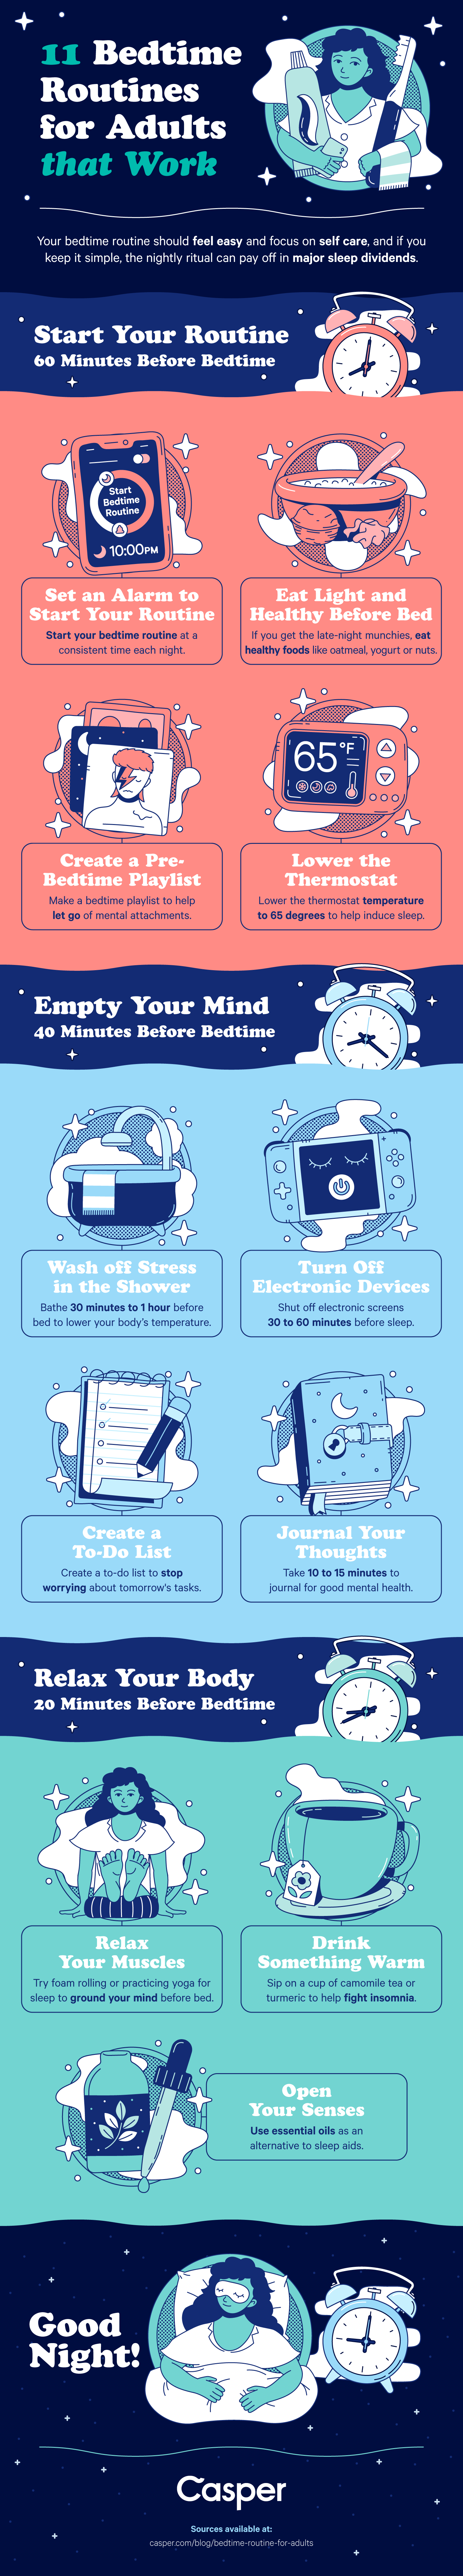 11-effective-bedtime-routines-for-adults-casper-blog